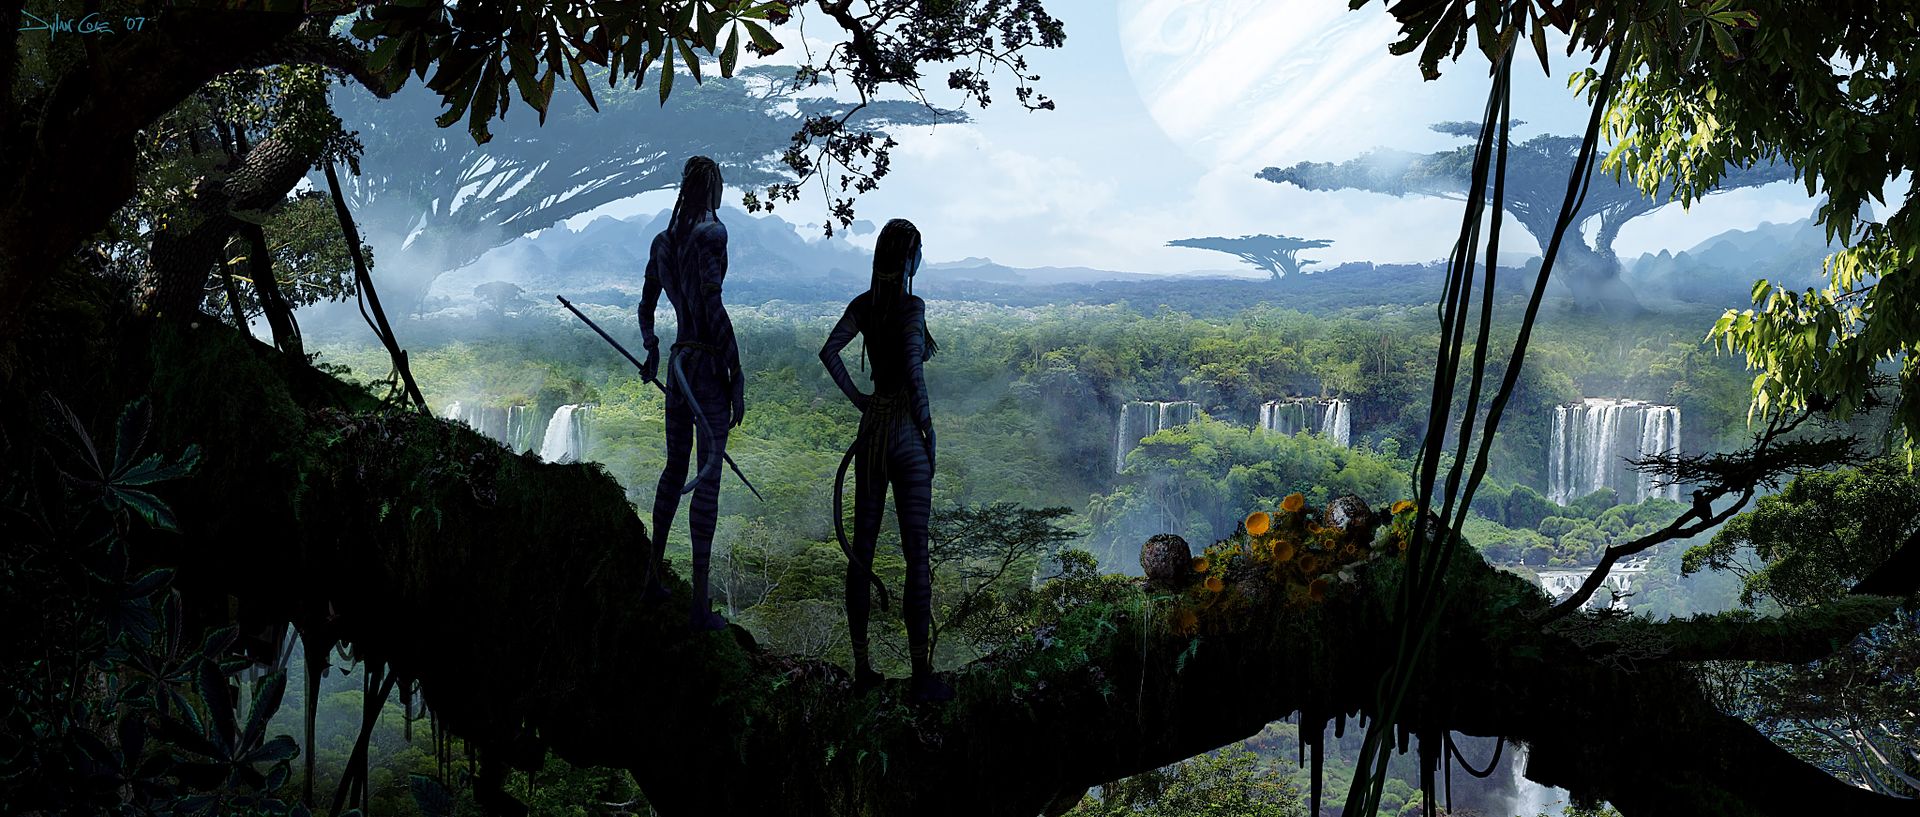 Pandoras breathtaking panorama, observed by the avatar Jake and his native love interest Neytiri.